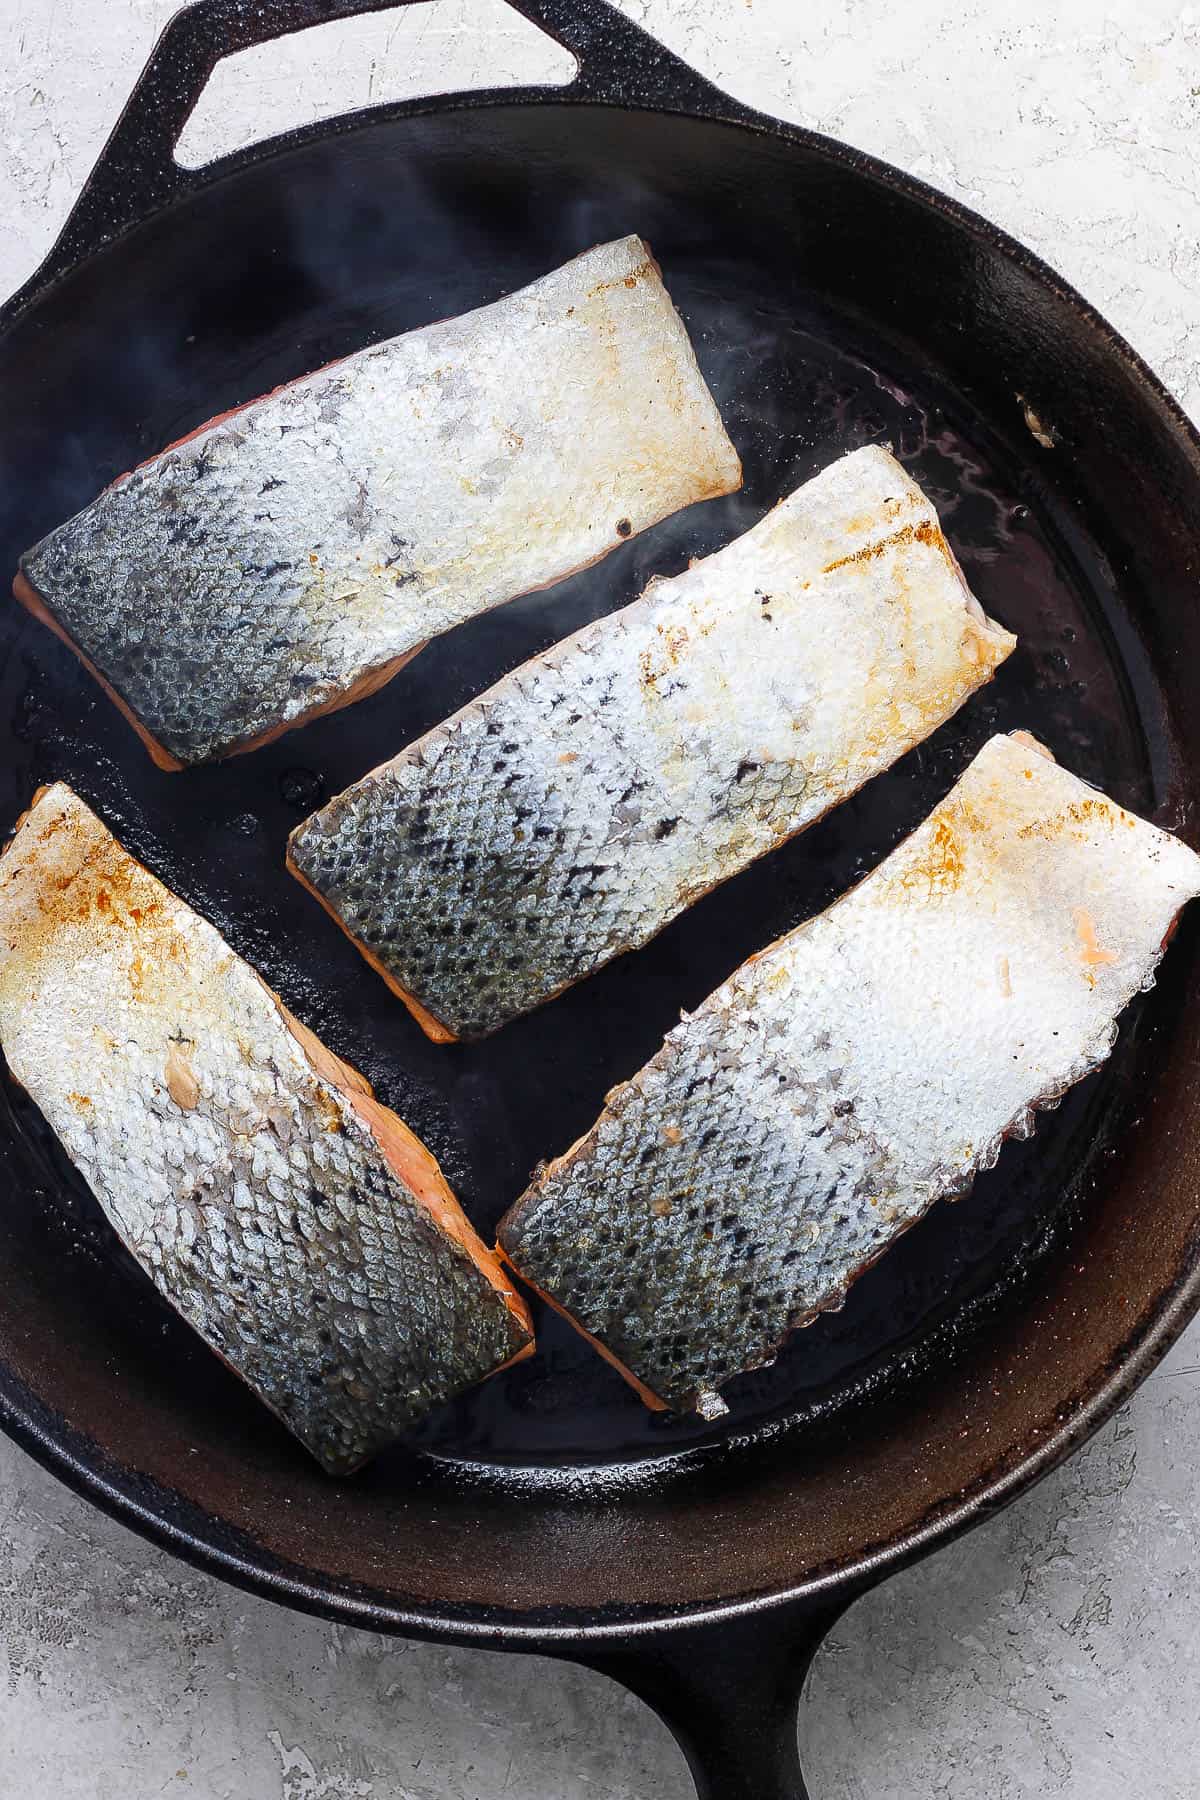 Salmon fillets searing in a cast iron skillet with the skin-side up.